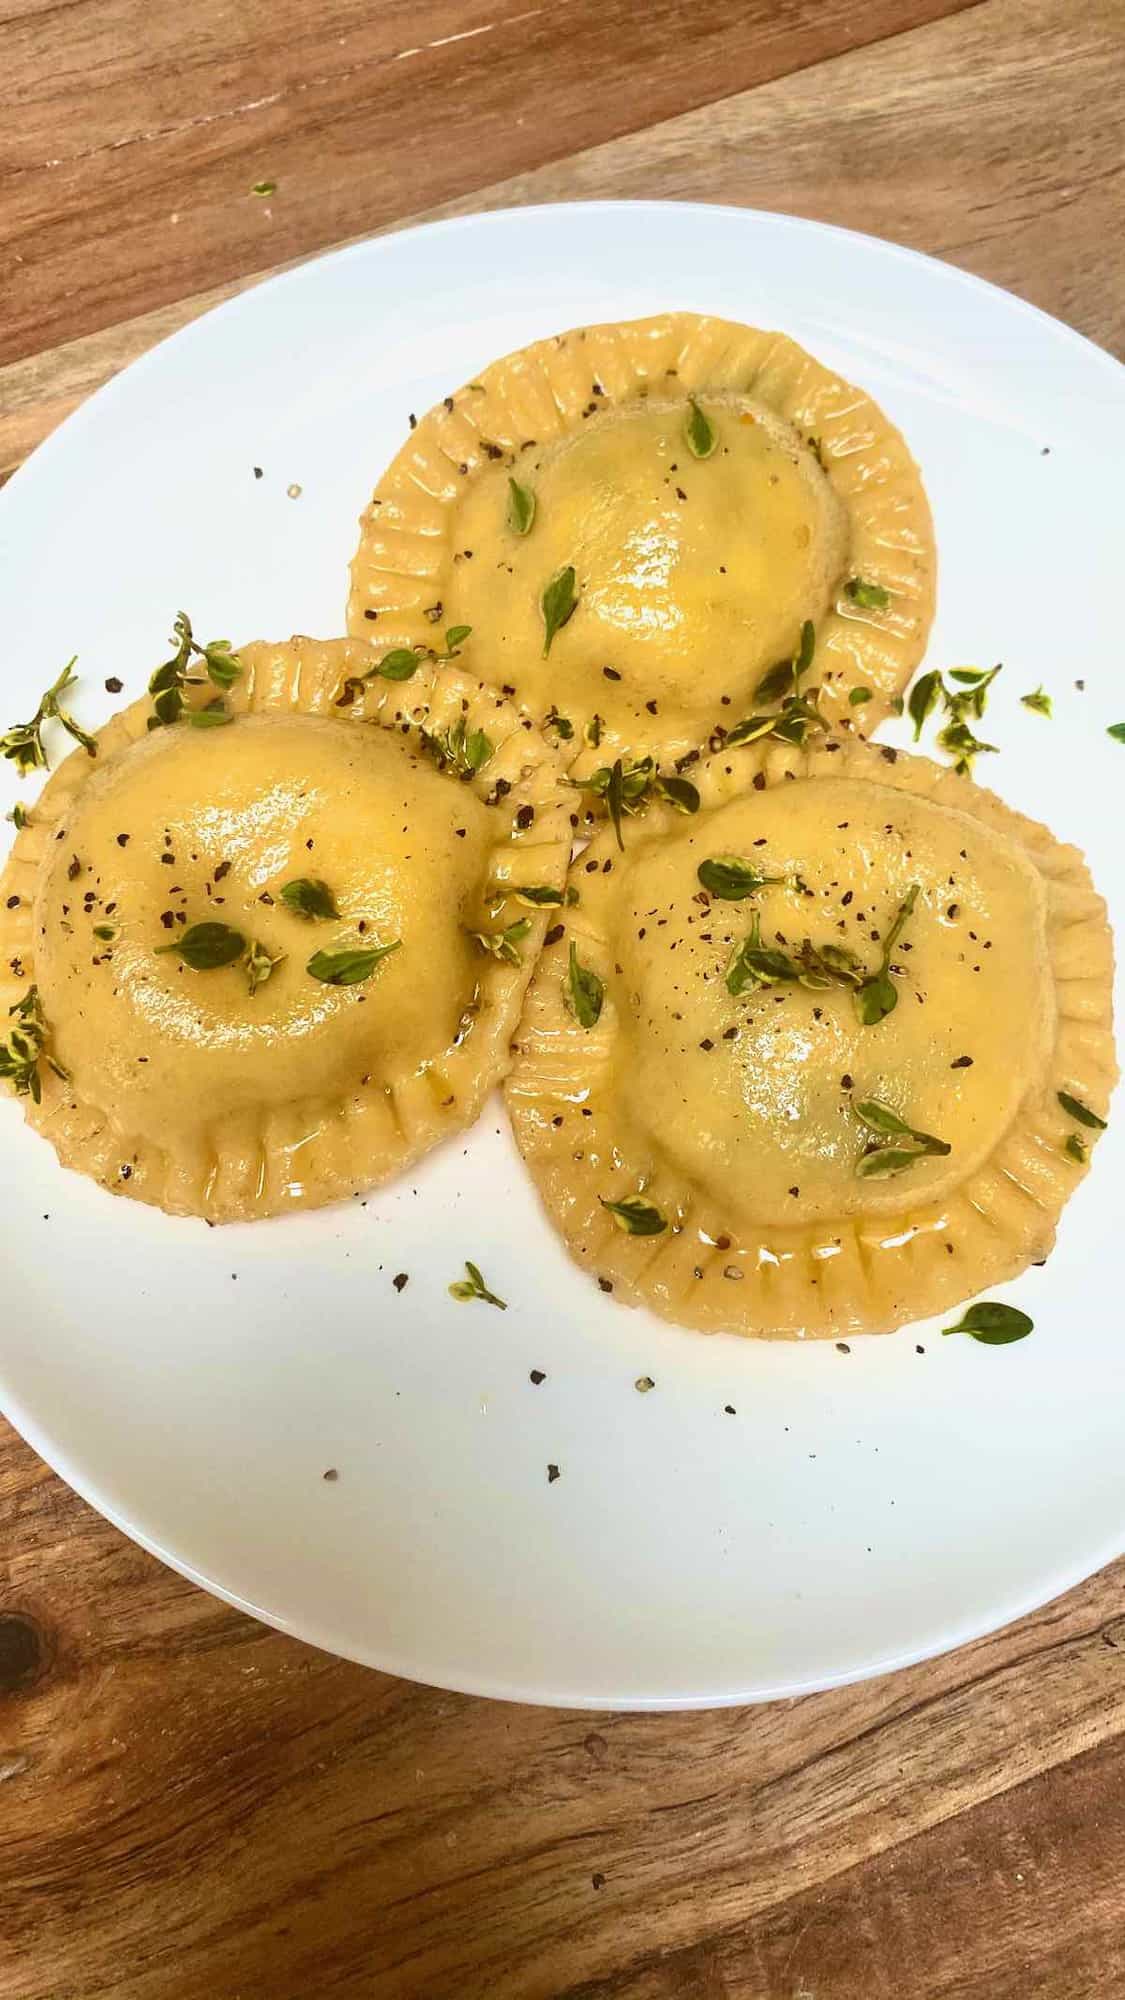 Three homemade ravioli with spinach filling in a plate